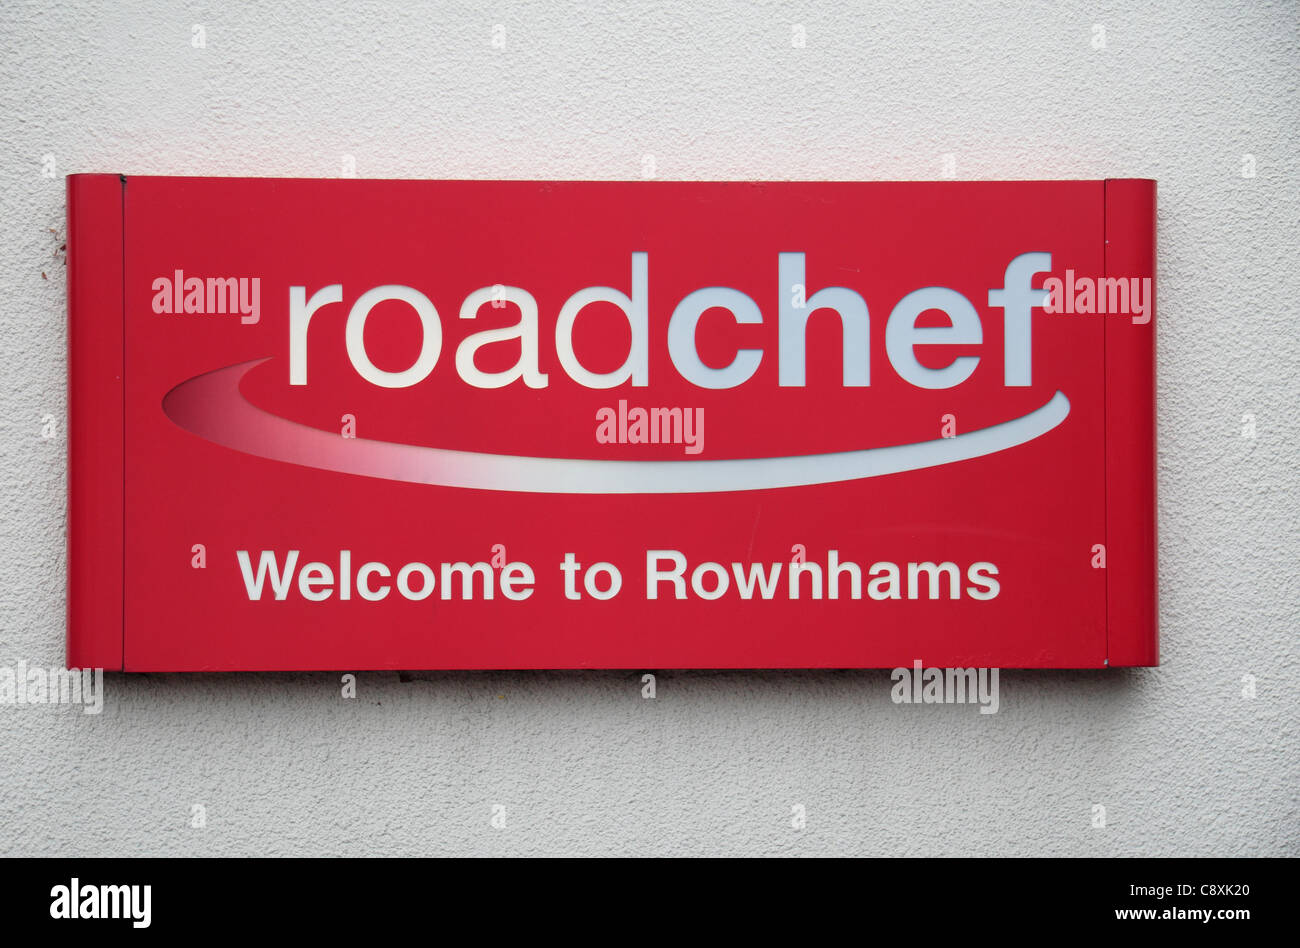 The Roadchef logo and sign at the Rownhams Motorway Services on the M27 (between Junctions 3 and 4), Southampton, Hampshire, UK. Stock Photo